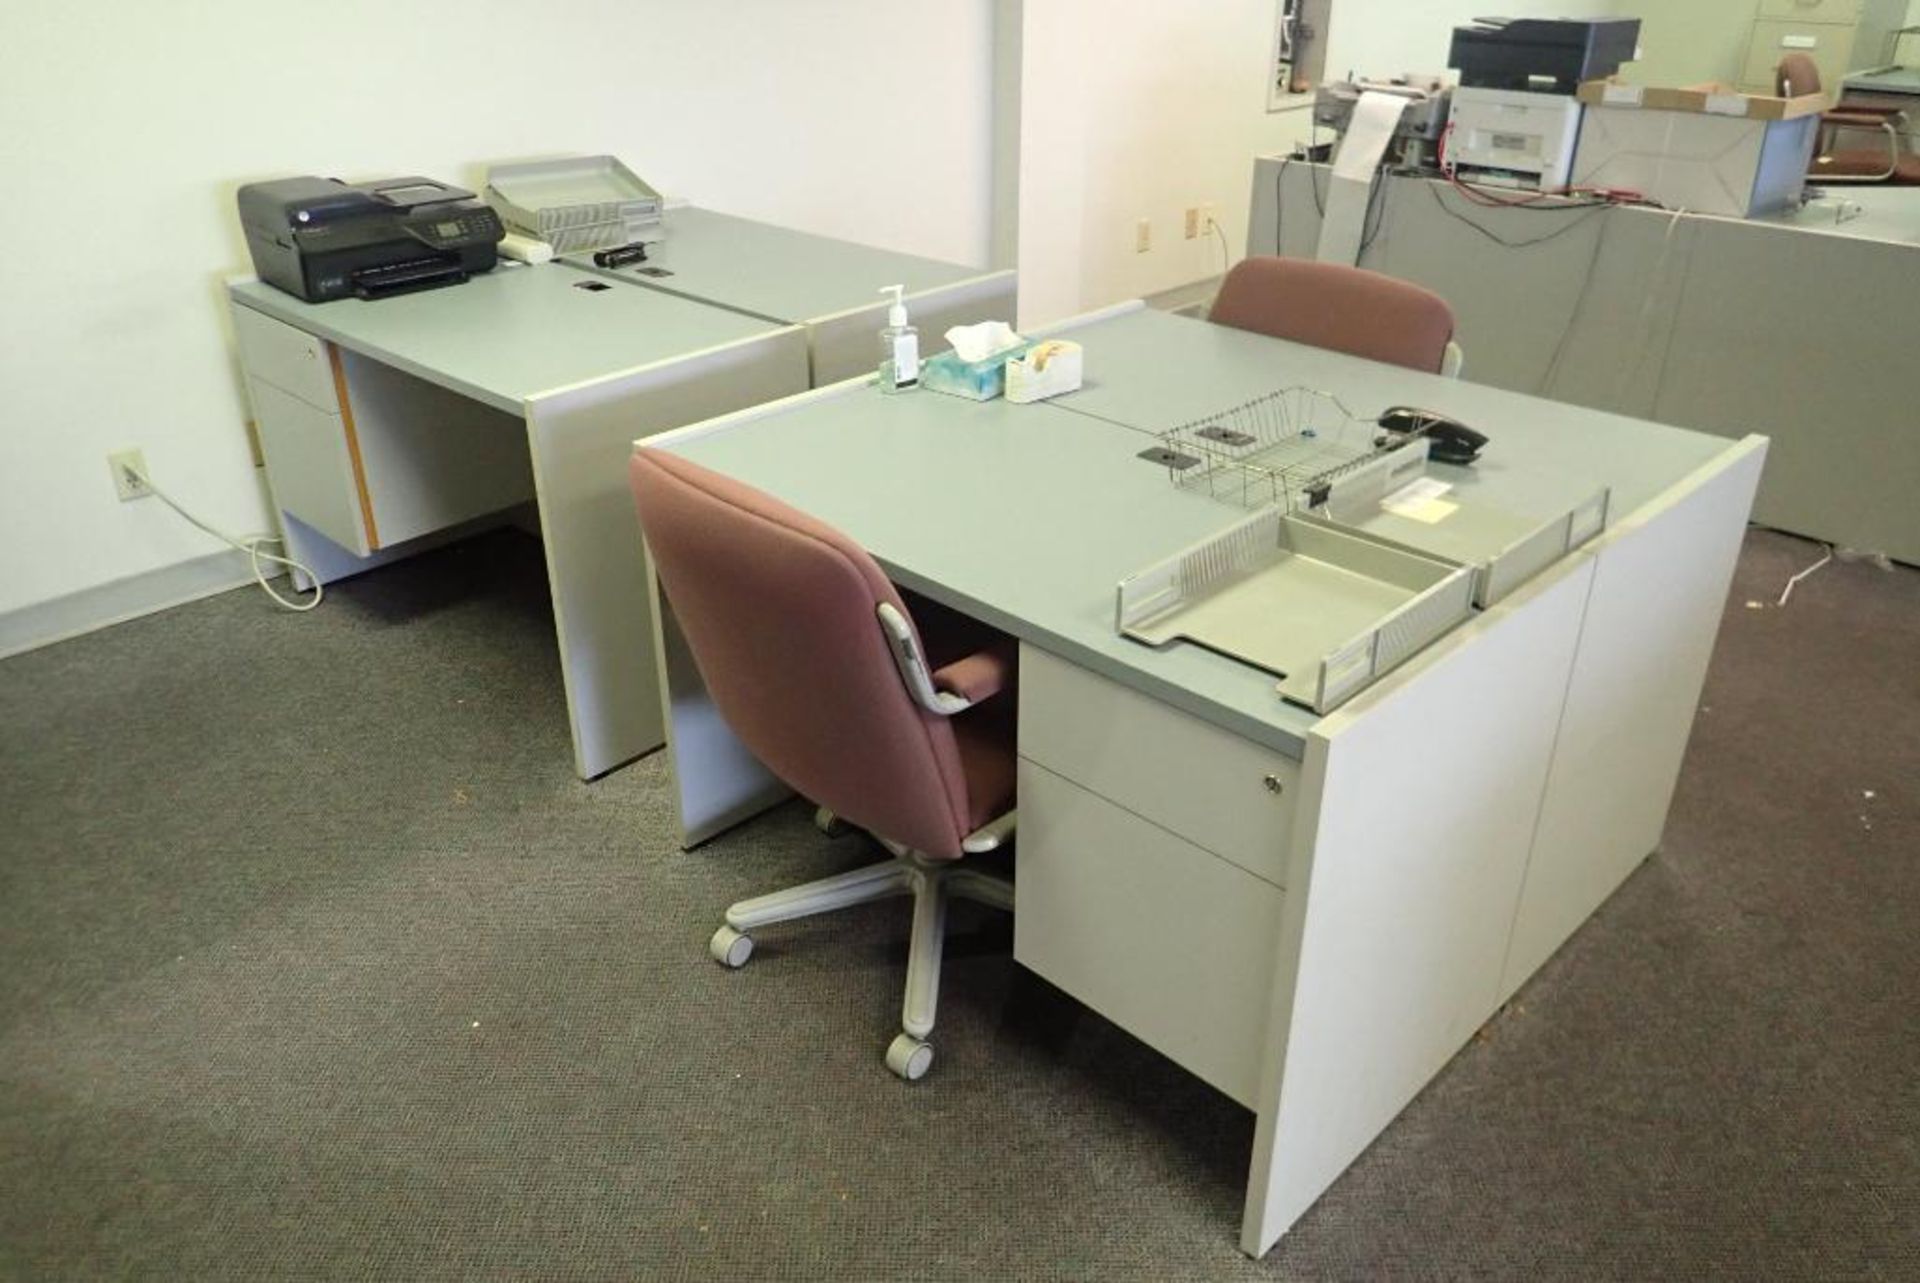 Lot of (4) Single Pedestal Desks, (2) Task Chairs and HP Officejet 4620 Printer.